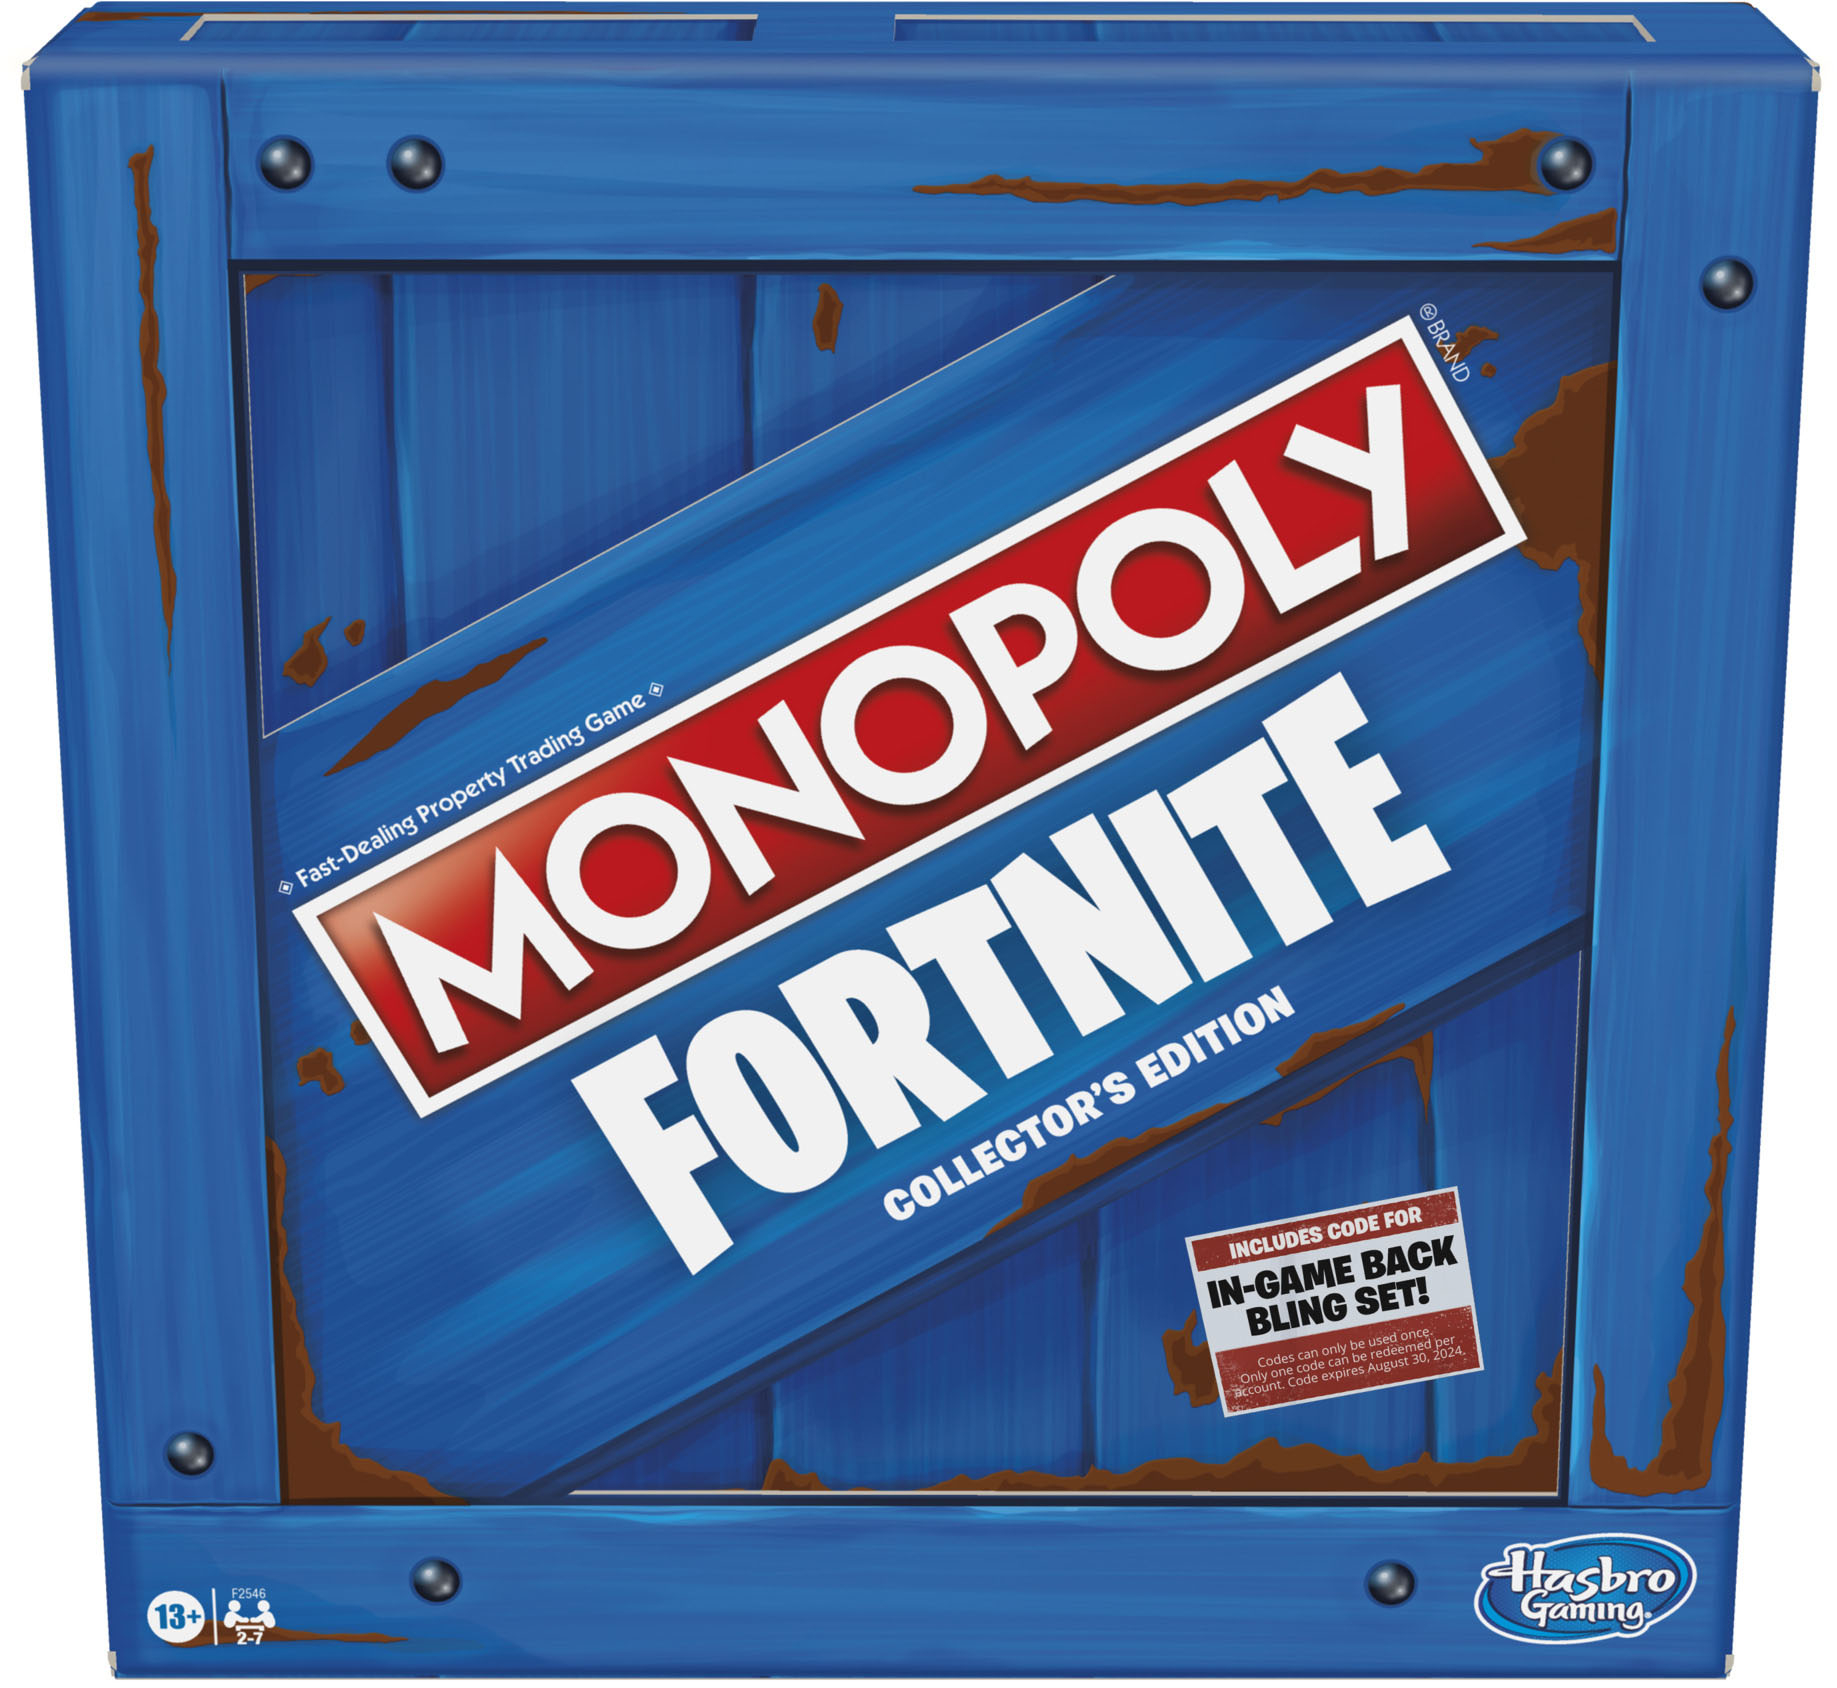 Hasbro Gaming - Monopoly: Fortnite Collector's Edition